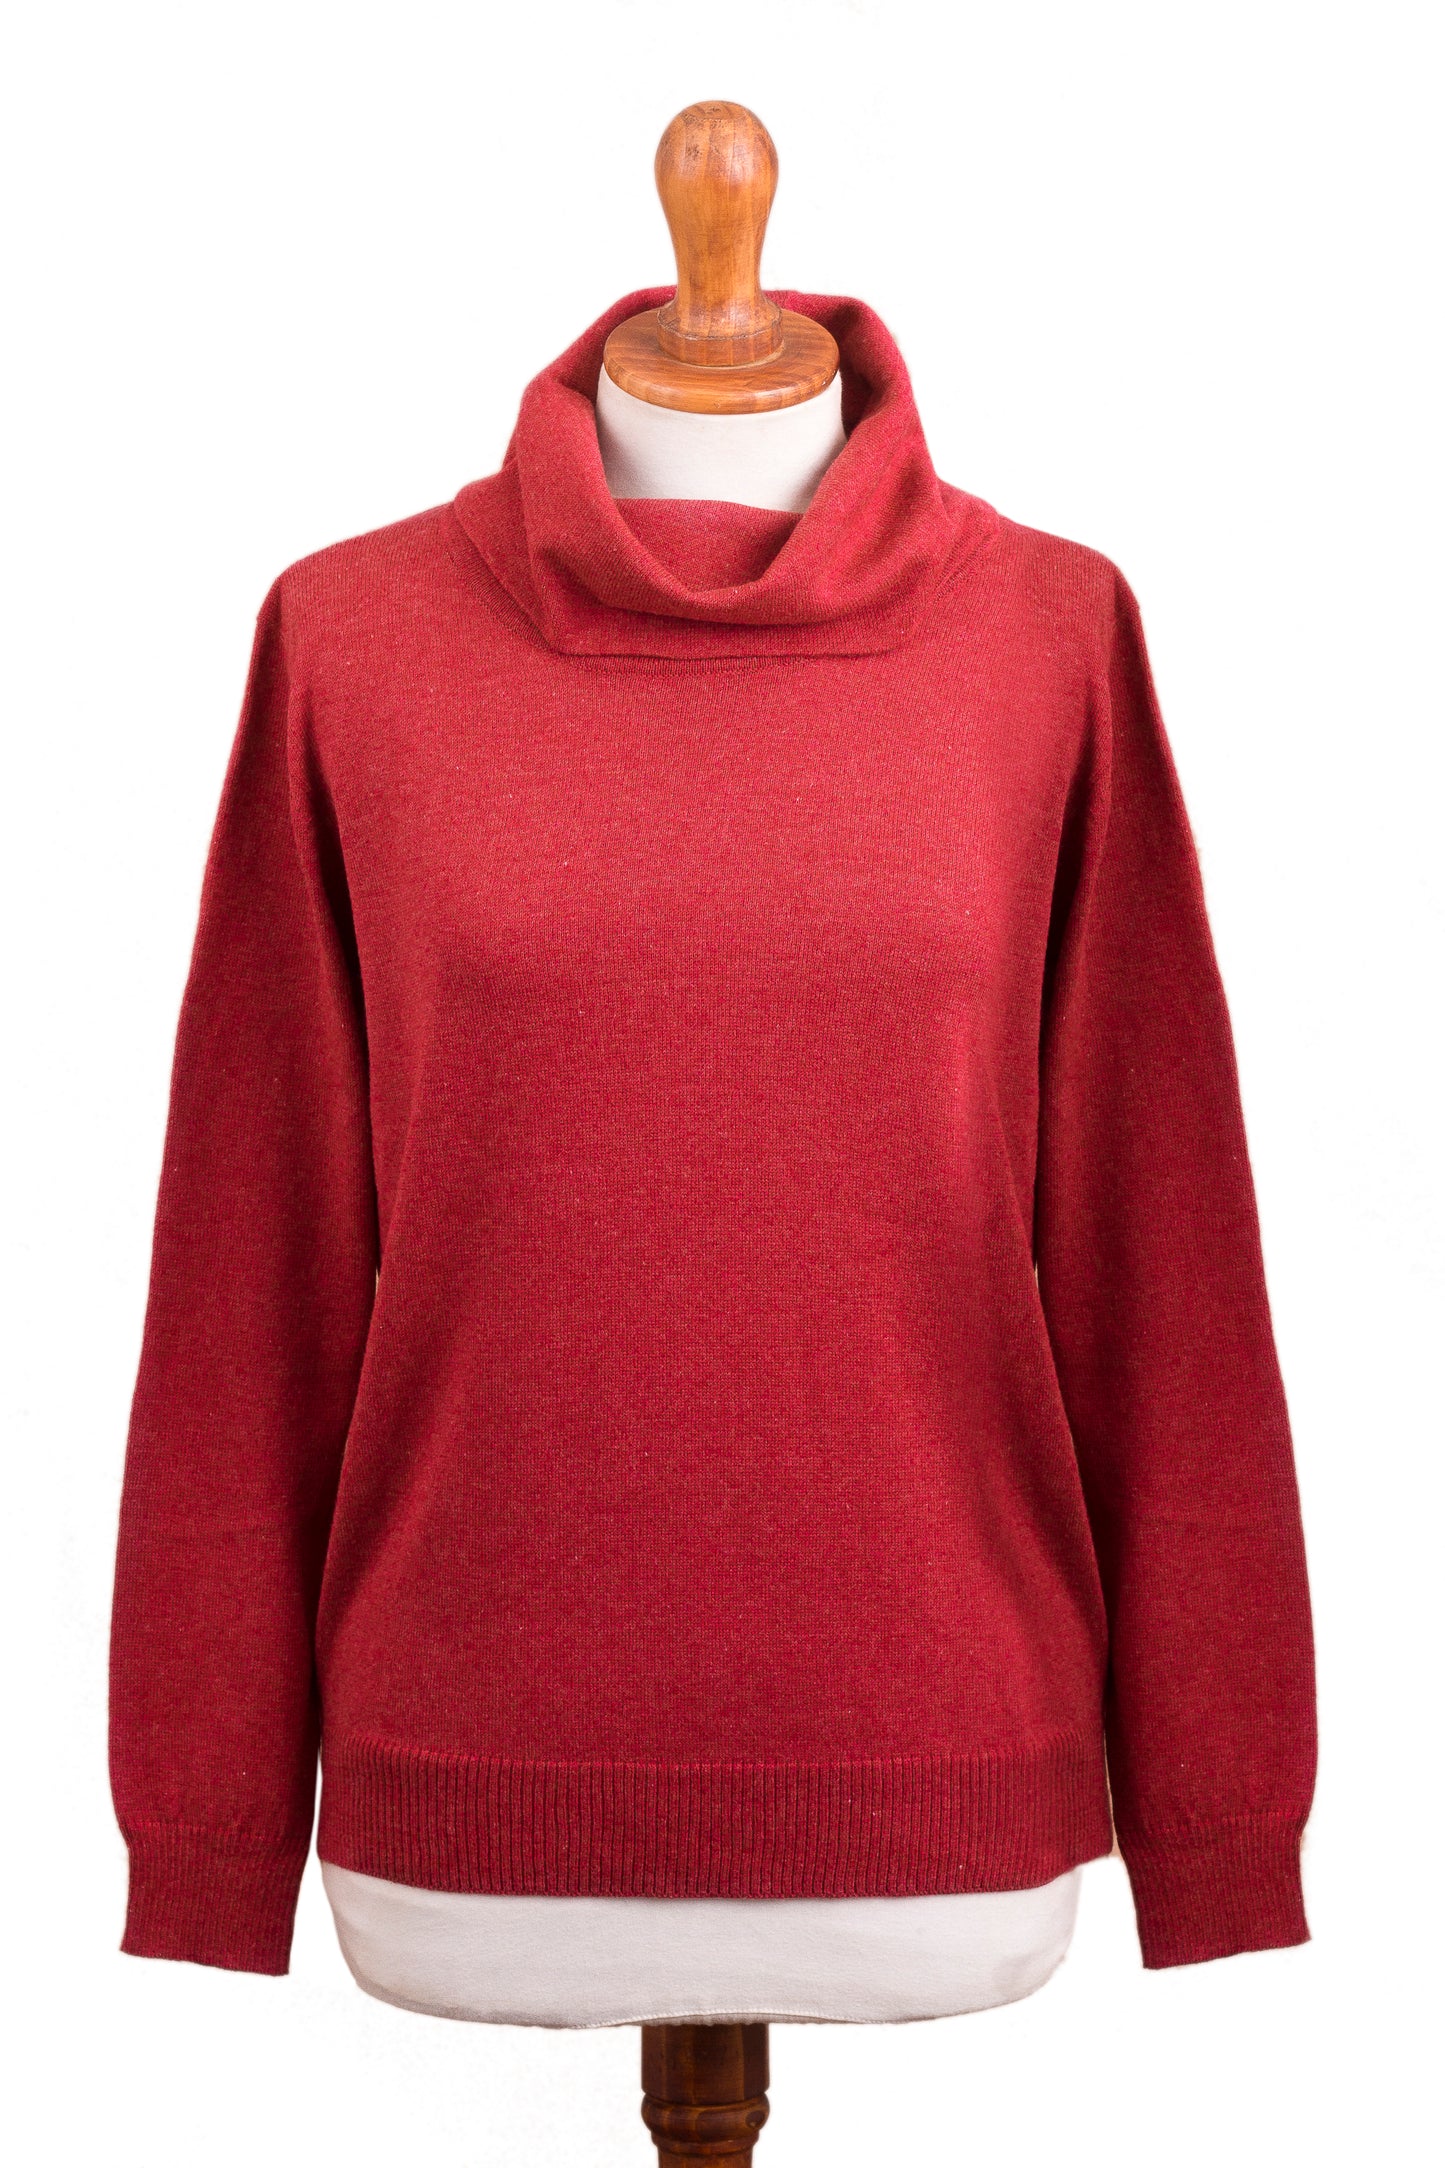 Cerise Versatility Knit Cotton Blend Pullover in Solid Cerise Red from Peru